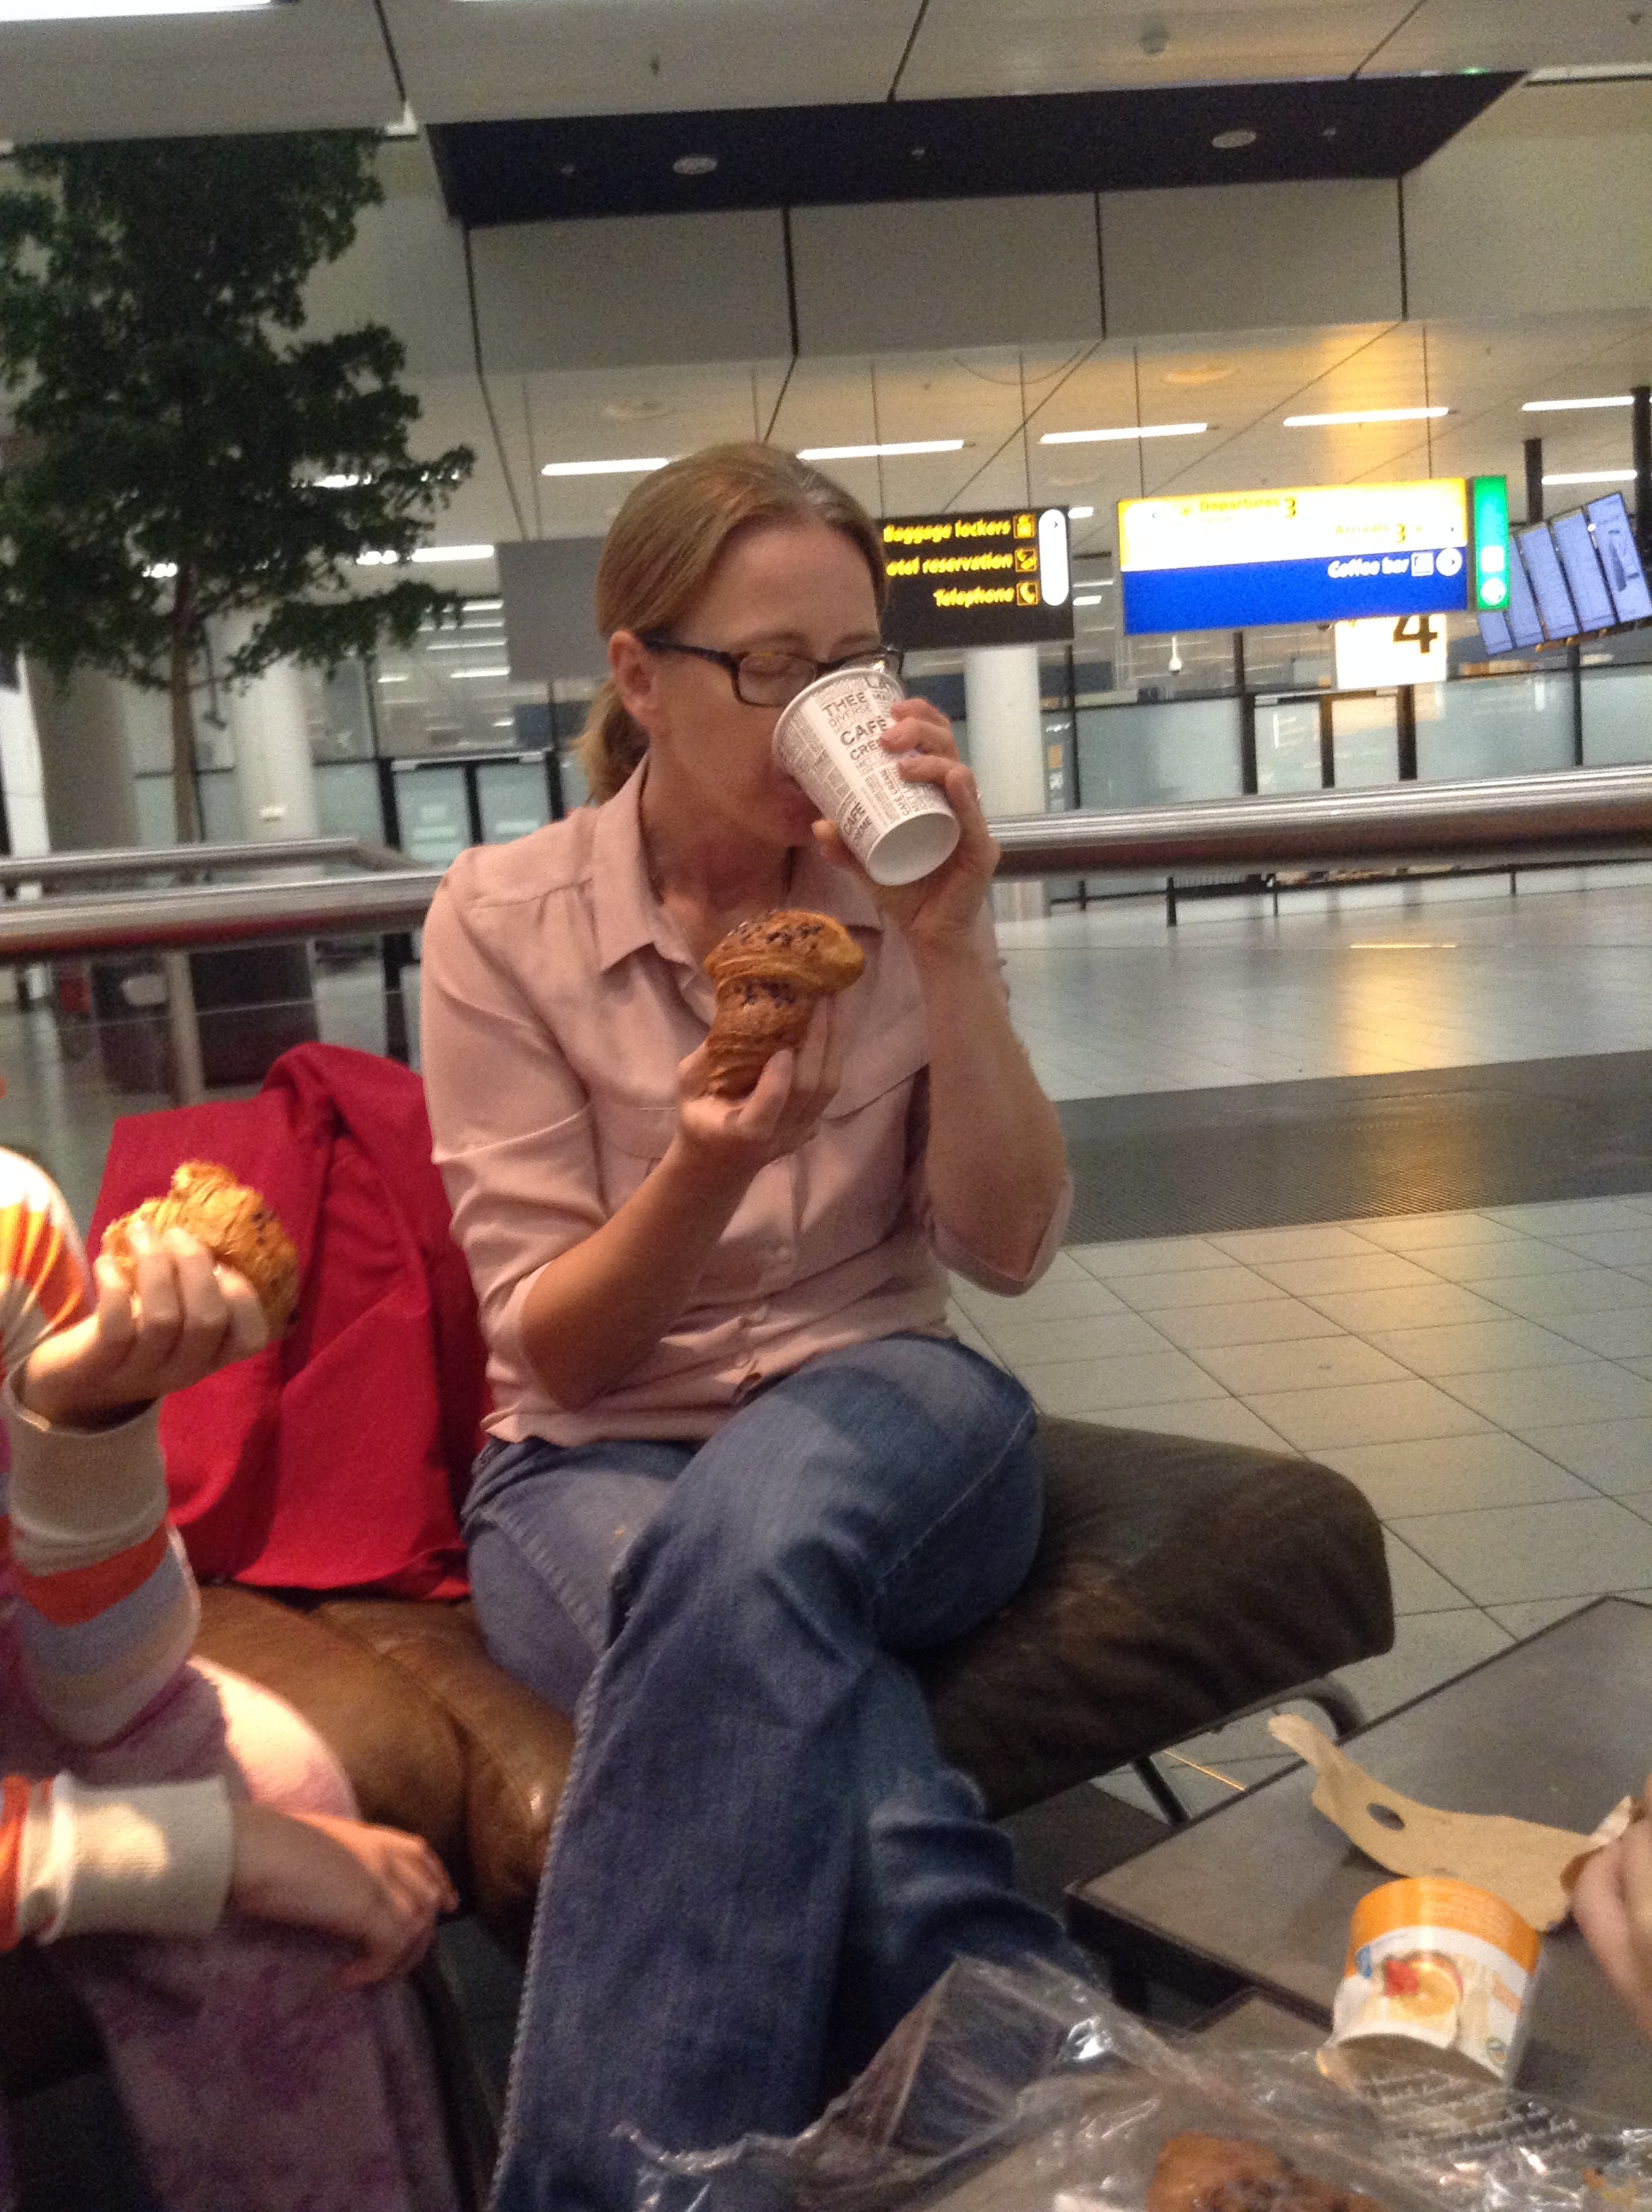 Eating a chocolate croissant and coffee in the Amsterdam airport